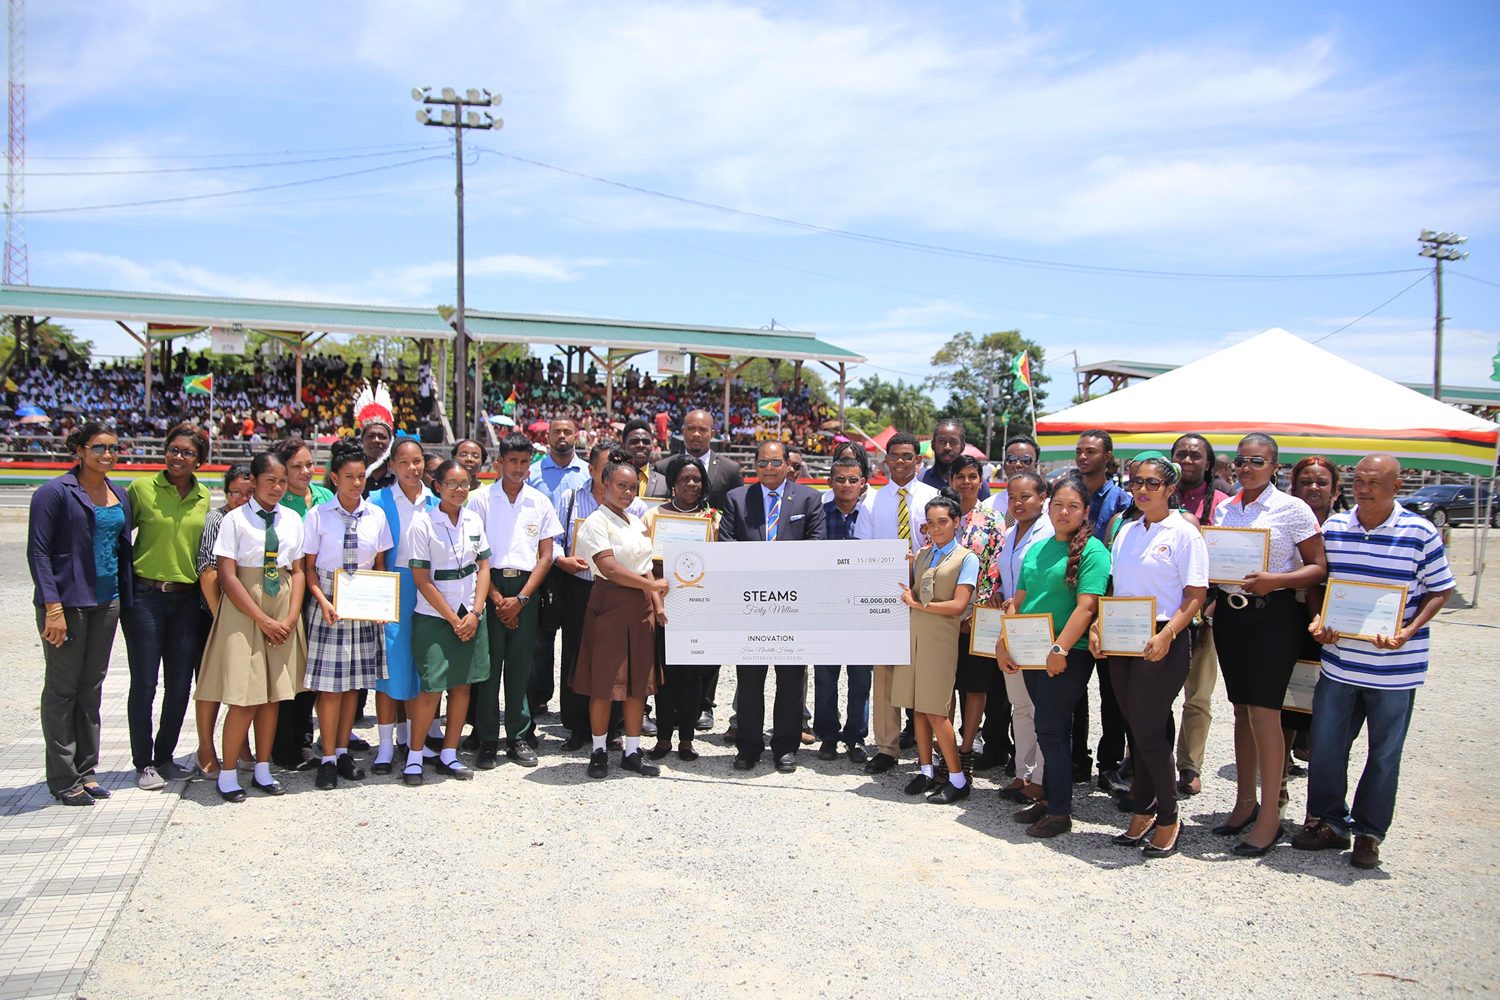 24 groups and 13 Science Technology Engineering and Mathematics (STEM) clubs were awarded $40 million in cash grants through the Innovation Programme of Guyana. Here, Prime Minister Moses Nagamootoo (at centre with cheque) stands with some of the awardees. (Photo by Keno George)